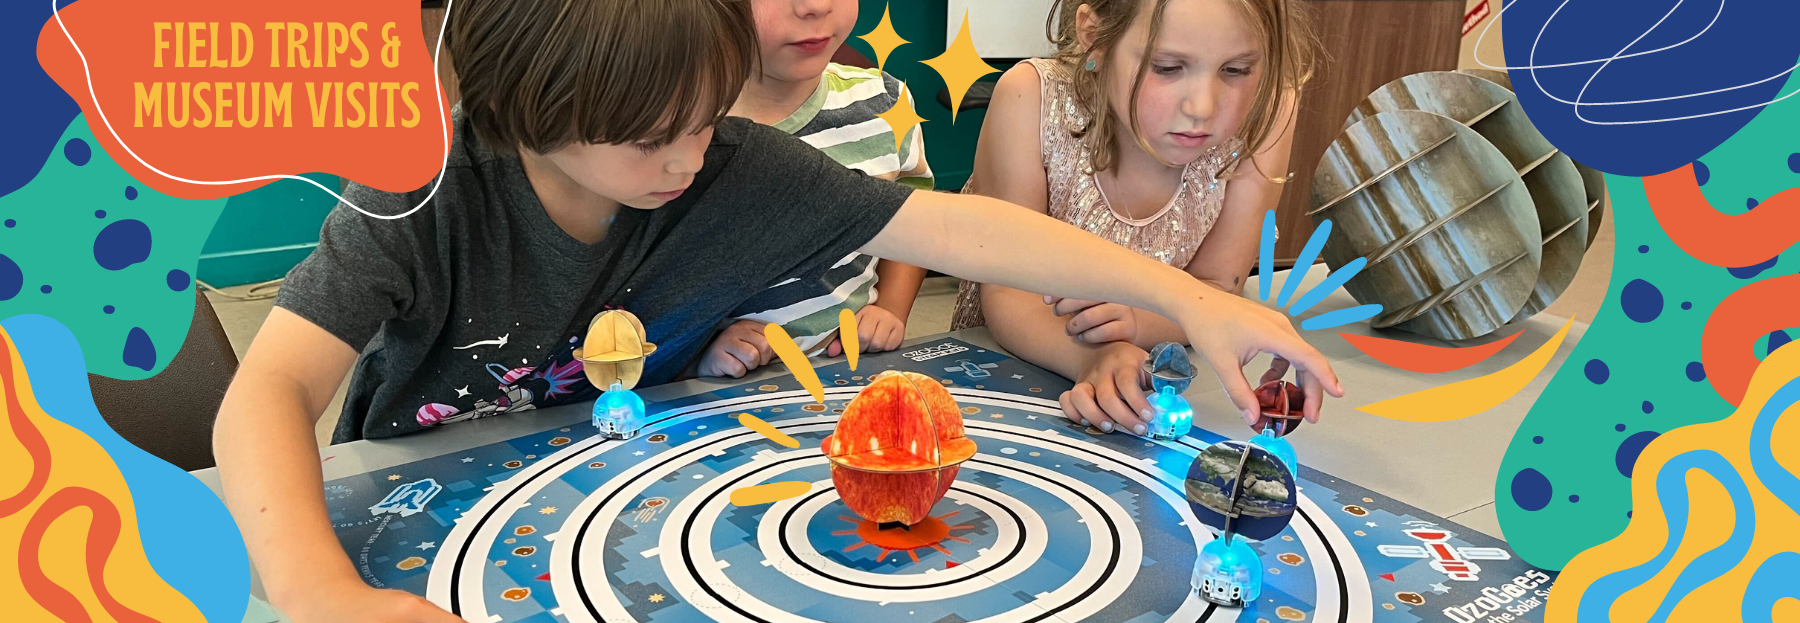 Summer Camp and Field trip activity using our Ozobots to model the solar system